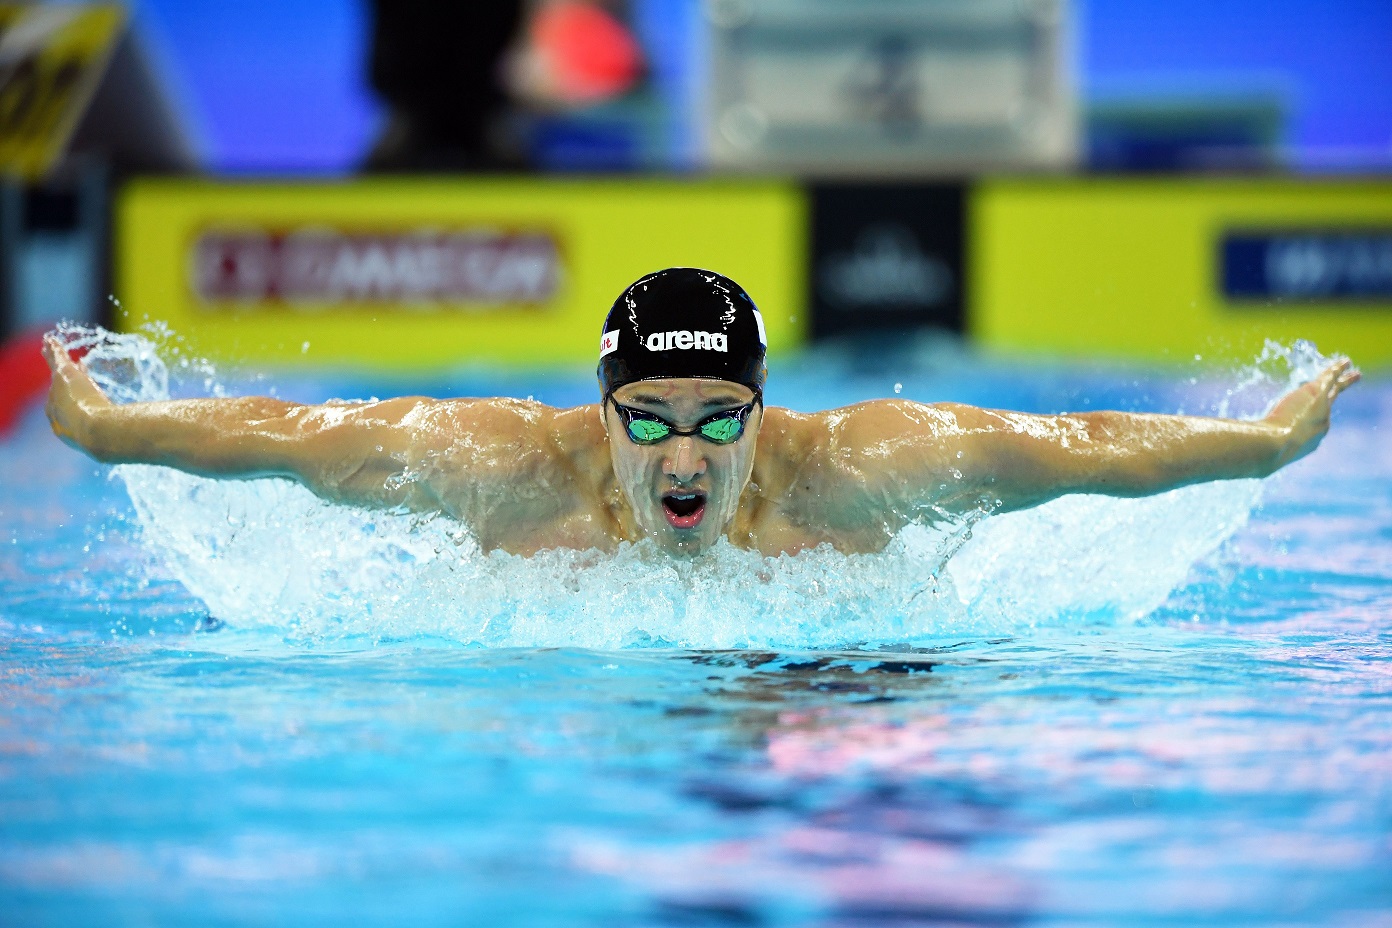 Stage Set As UAE’s Talented Swimmers Join World’s Best Aquatic Talent For FINA World Swimming Championships, Aquatics Festival Tuesday